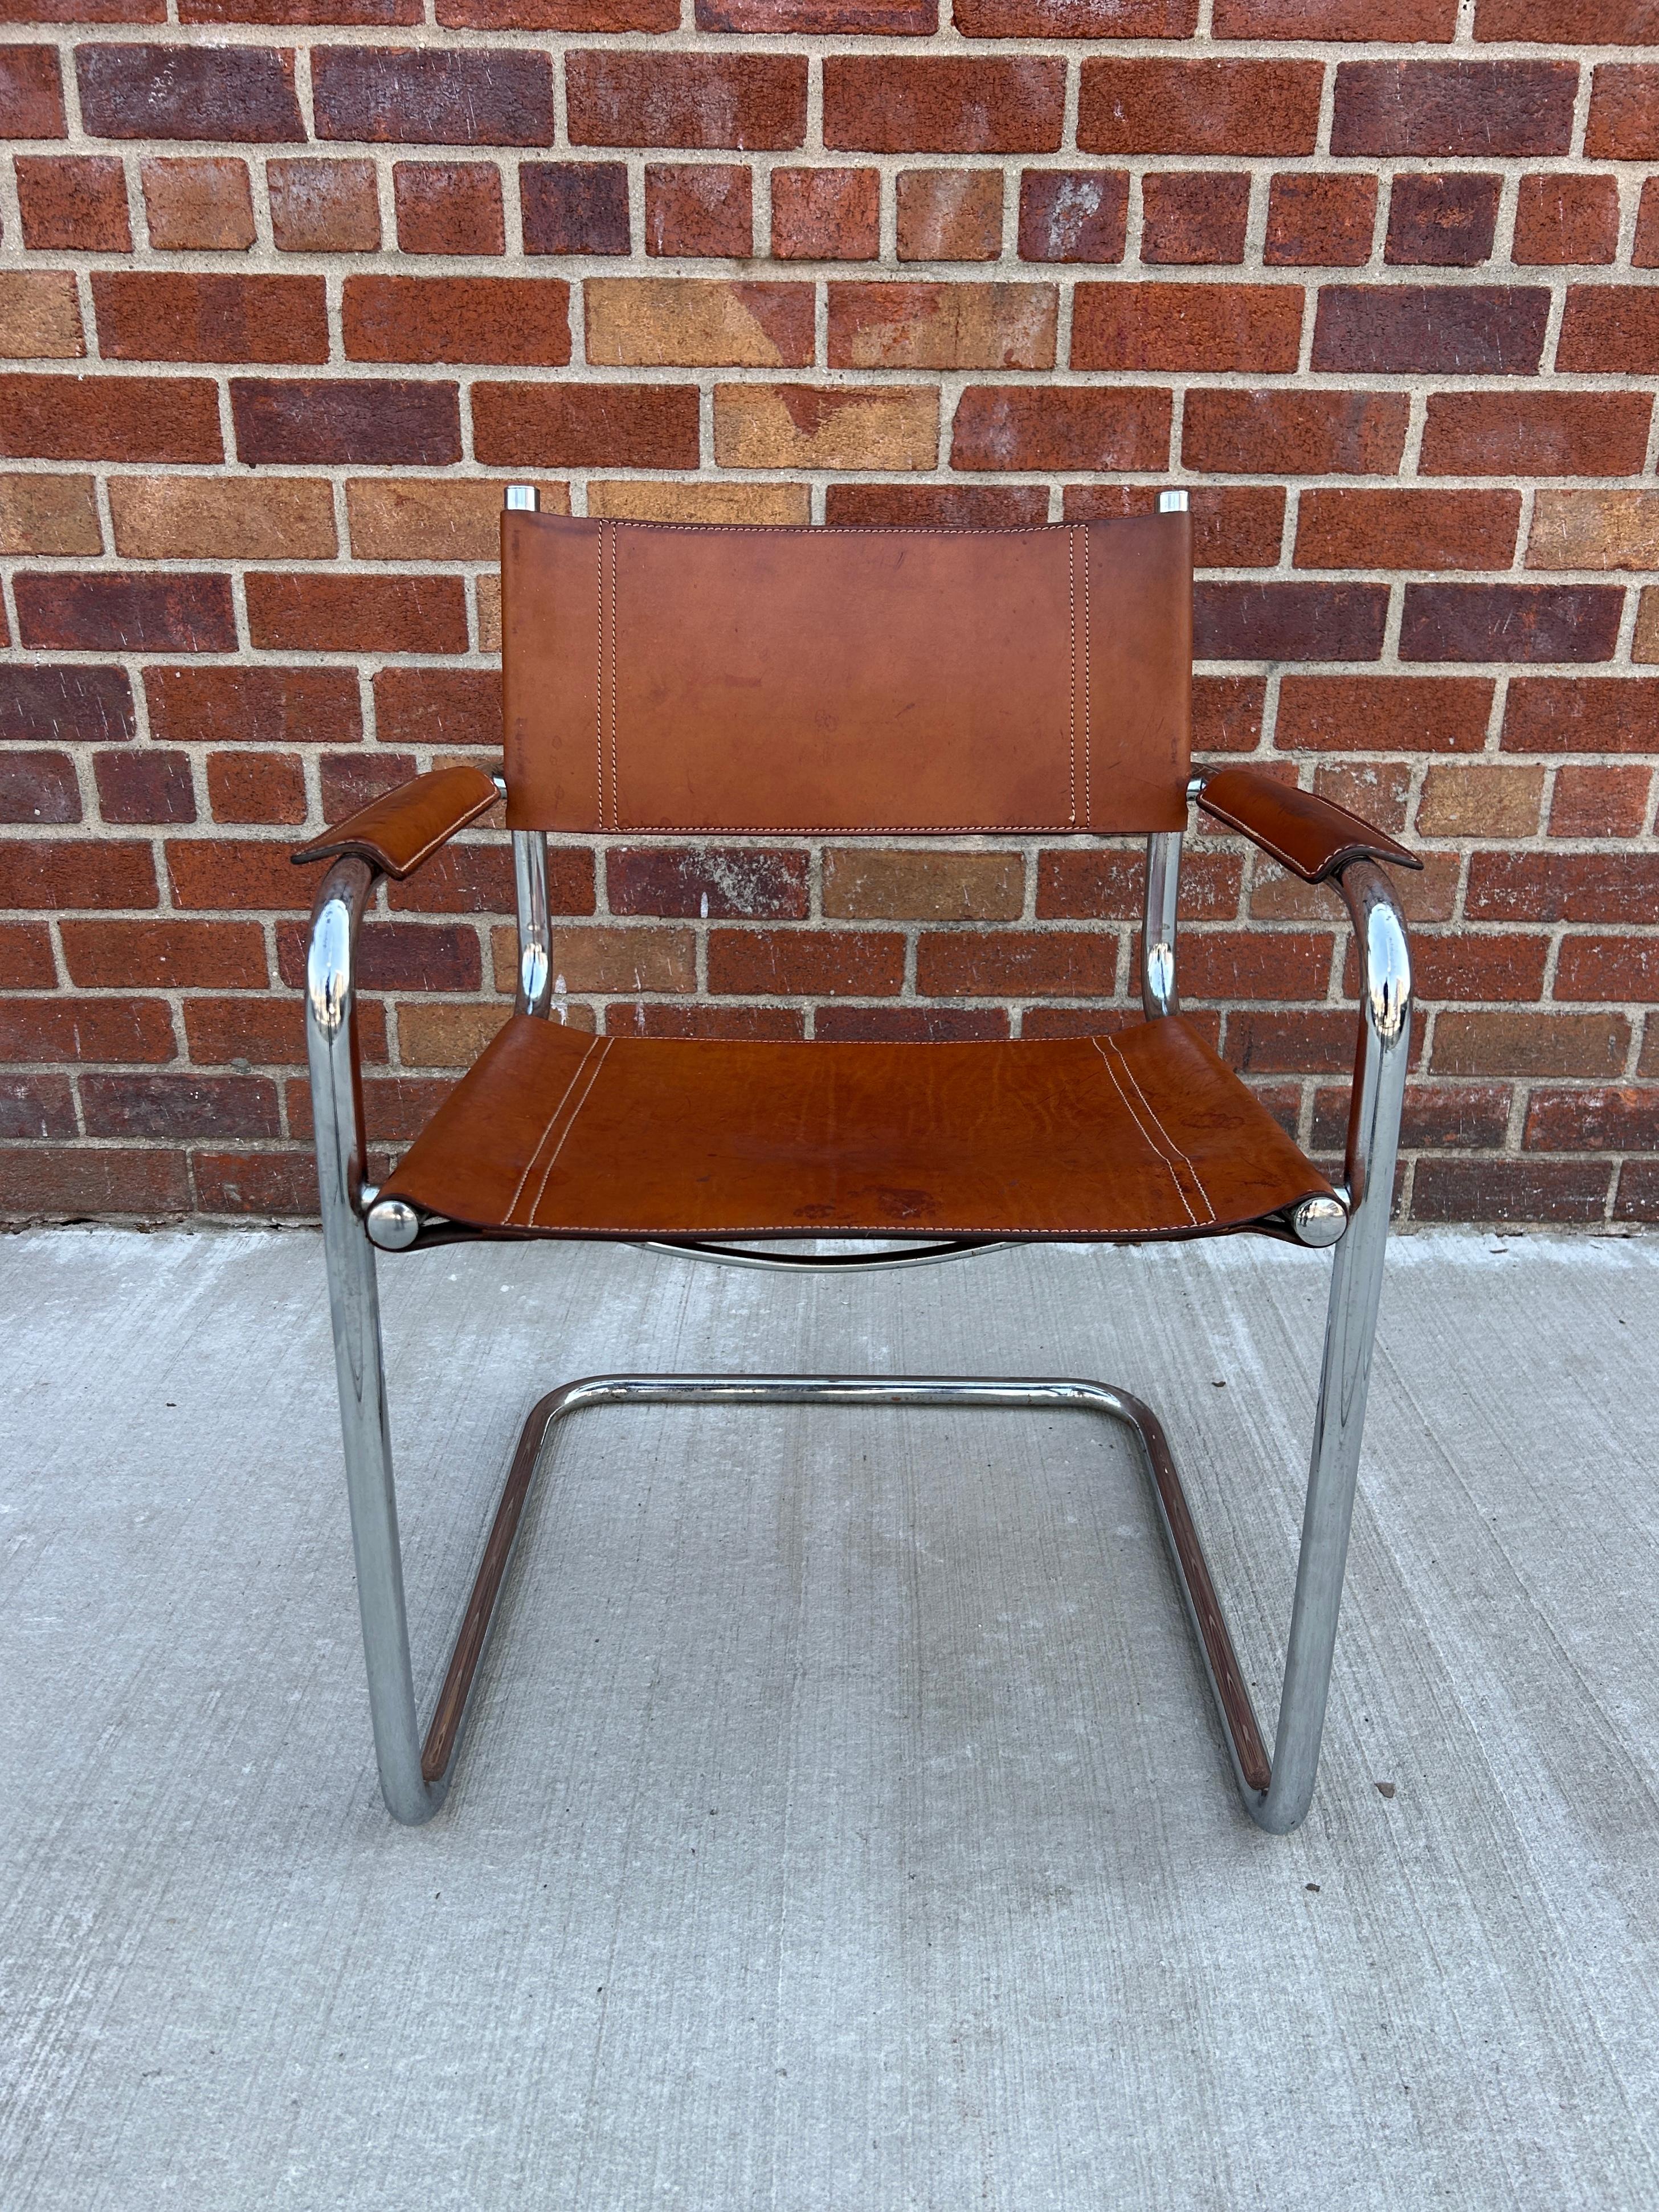 Mid century Vintage chrome tan leather Mart Stam model B34 chair. (4) chairs are available. These chairs are used worn with Patina on the beautiful brown leather. Great modern designed chairs. Made in Italy Circa 1970. Located in Brooklyn